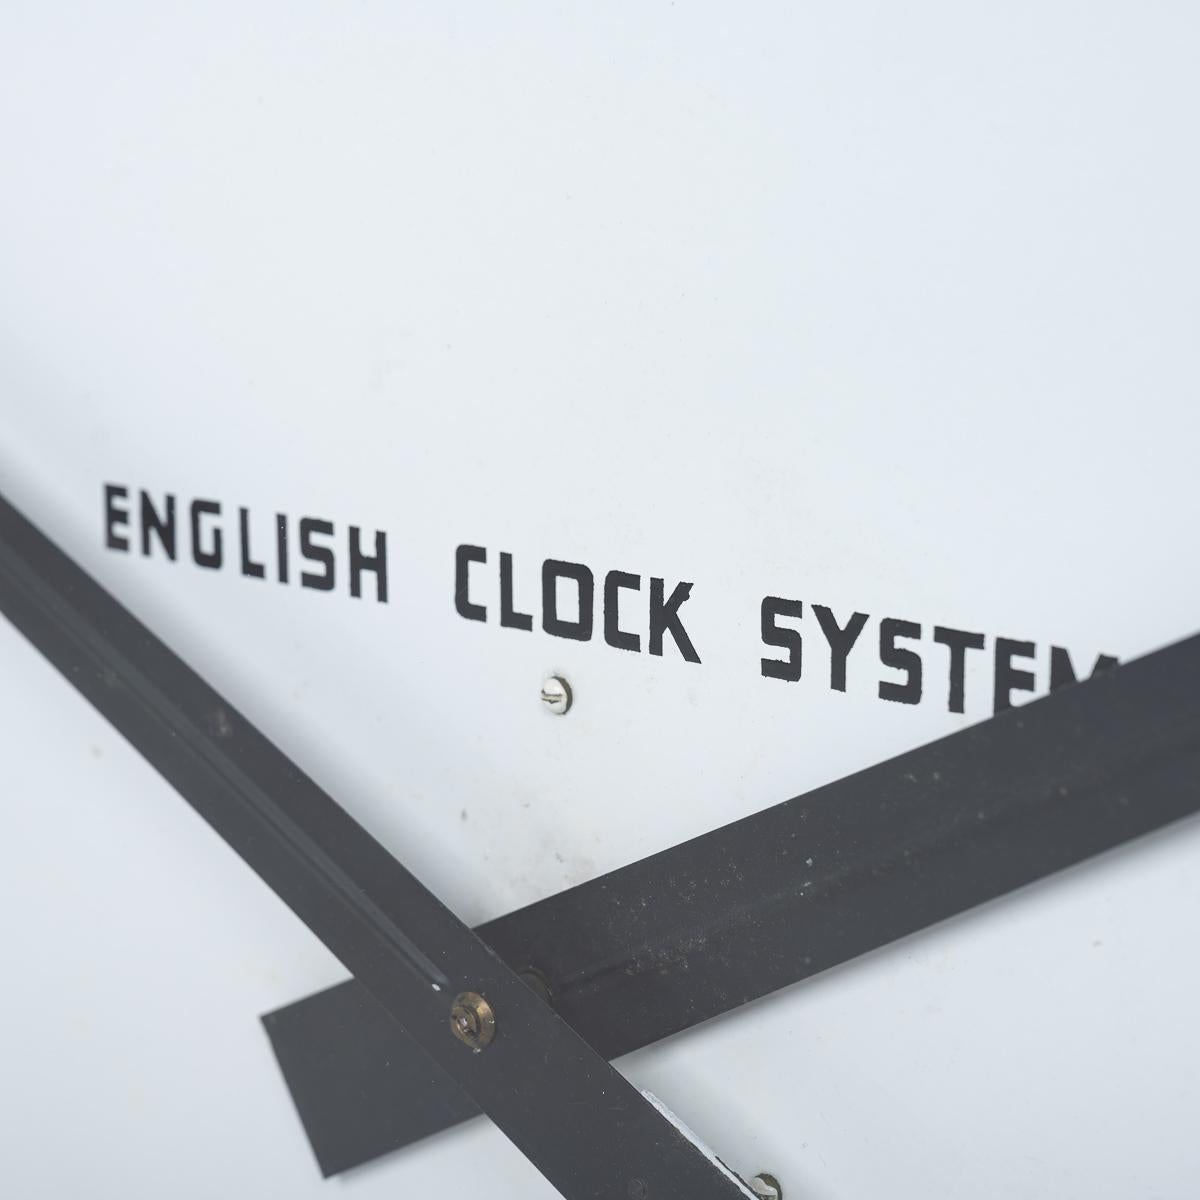 Industrial Huge Reclaimed Double Sided Square Factory Clock by English Clock Systems Ltd For Sale